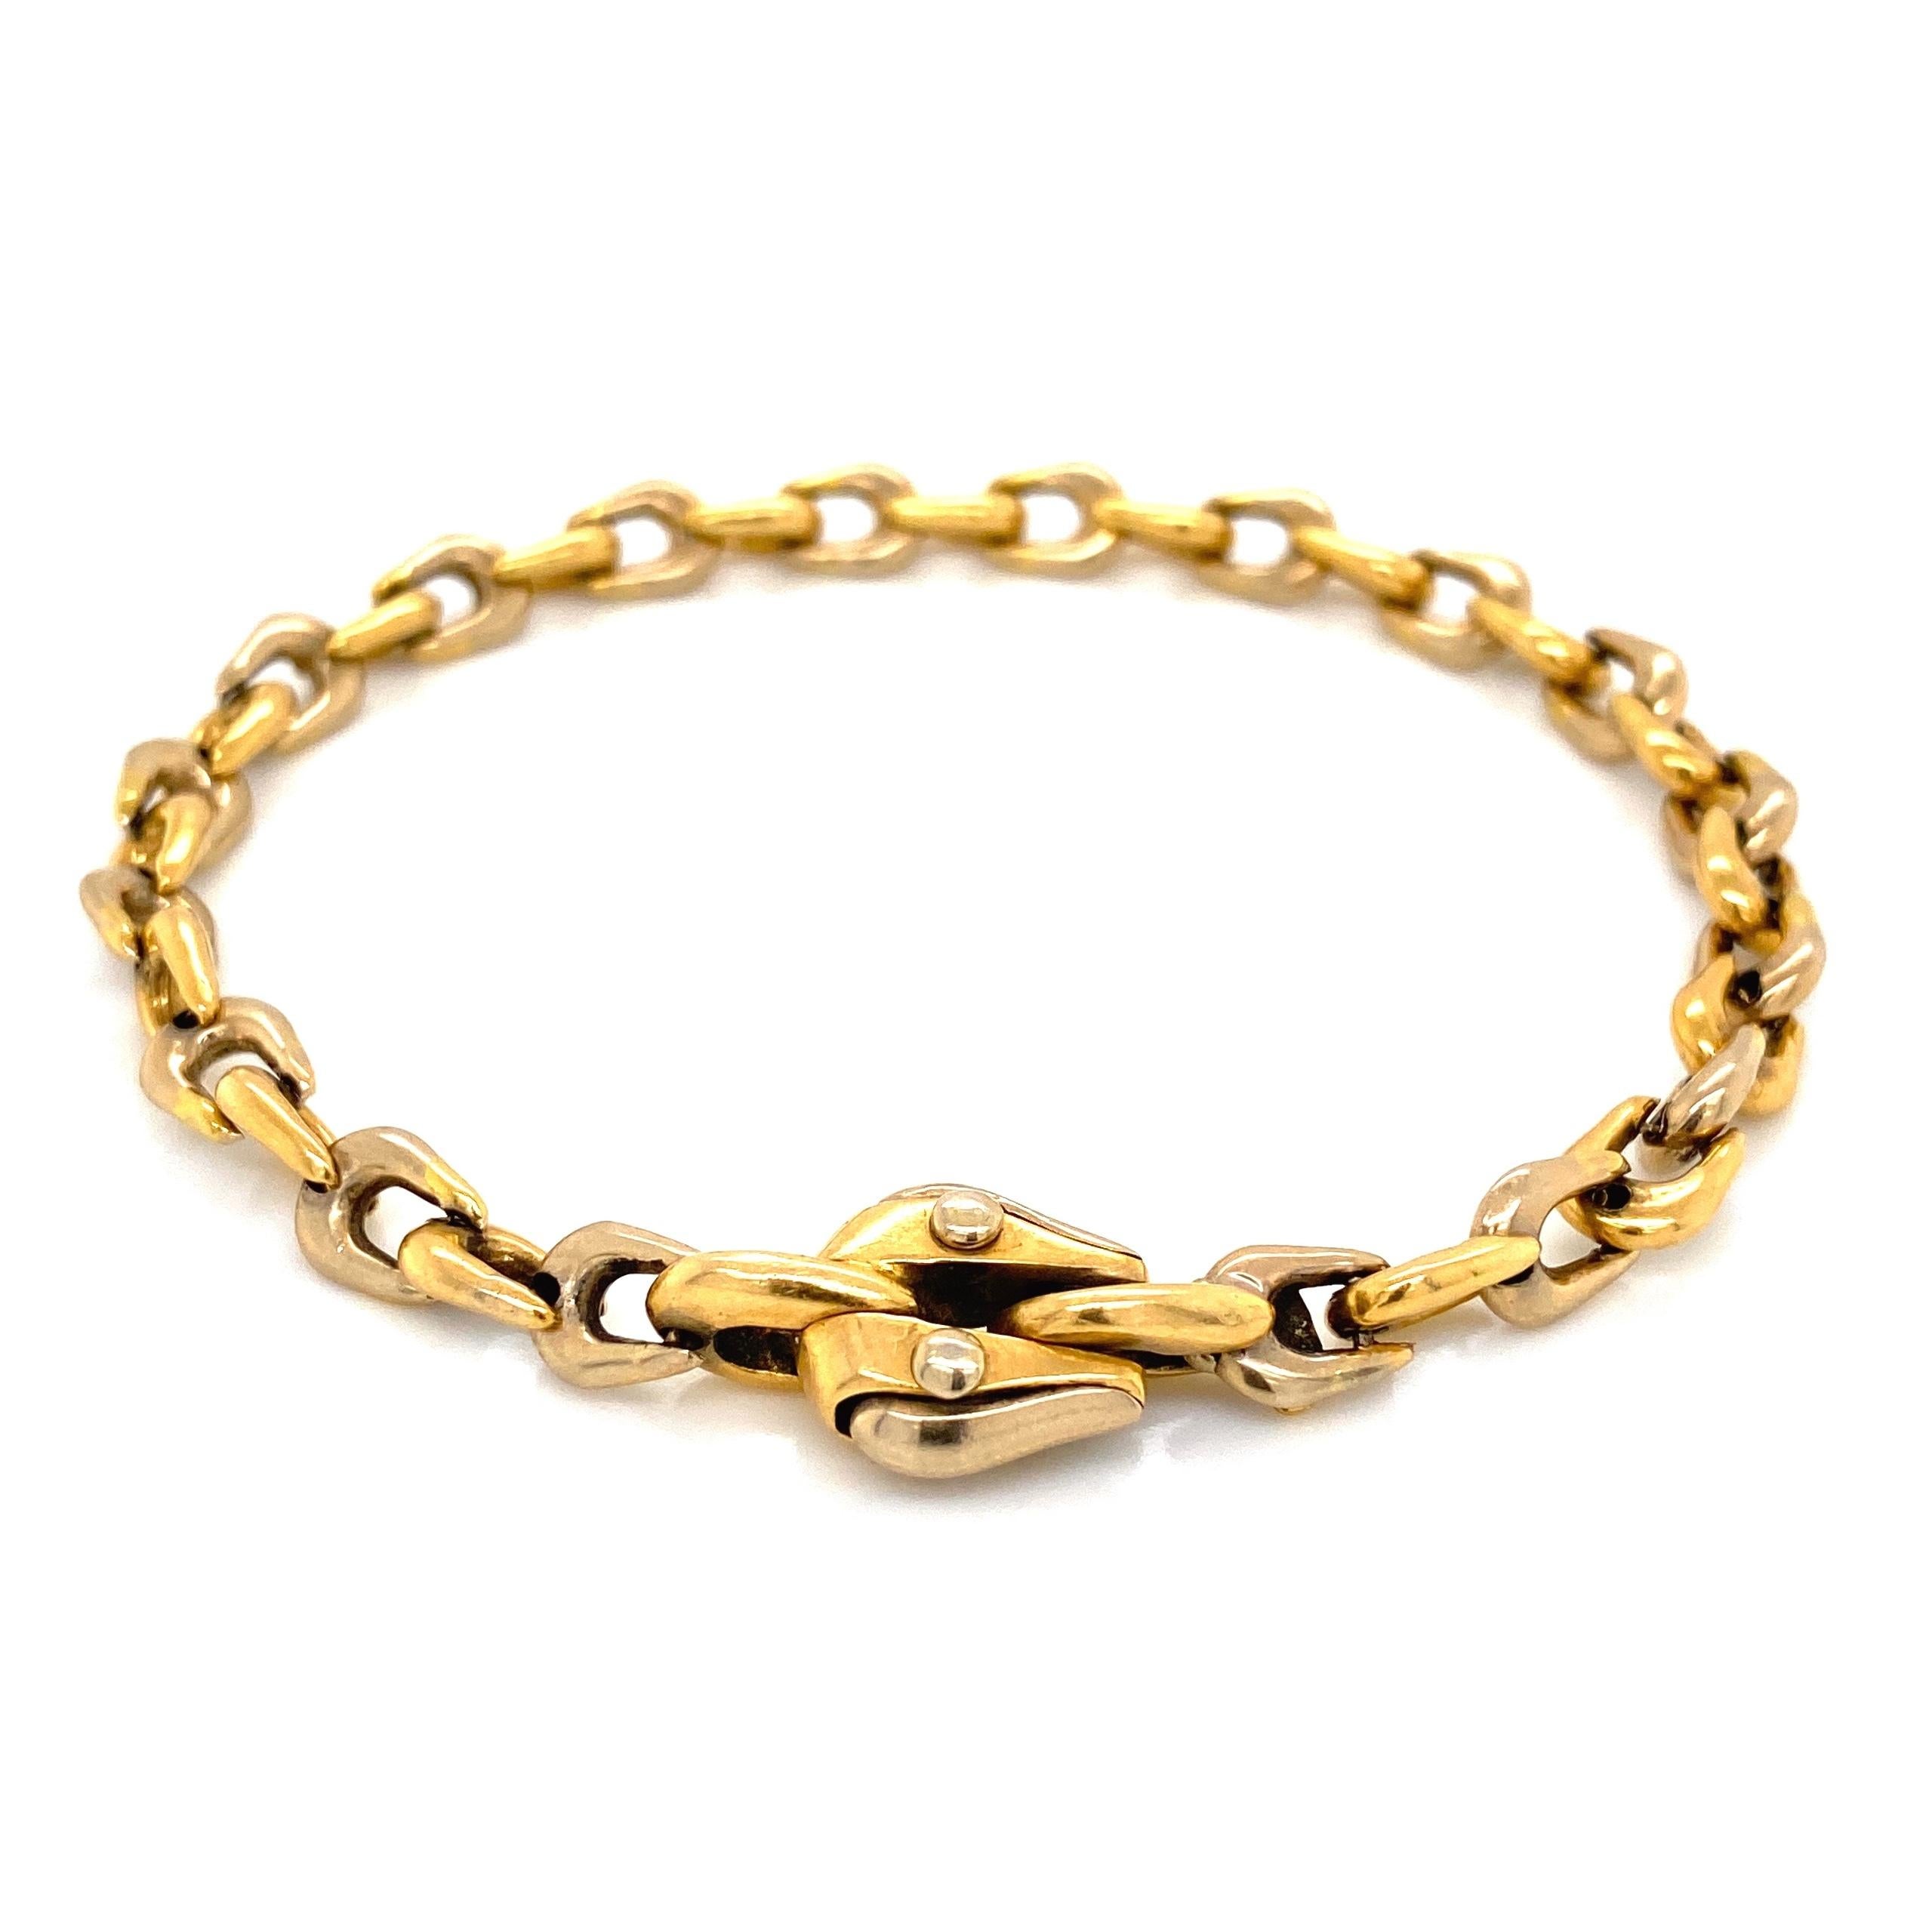 Deluxe Fancy Link Gold Bracelet with Push Button Clasp. Approx. 8